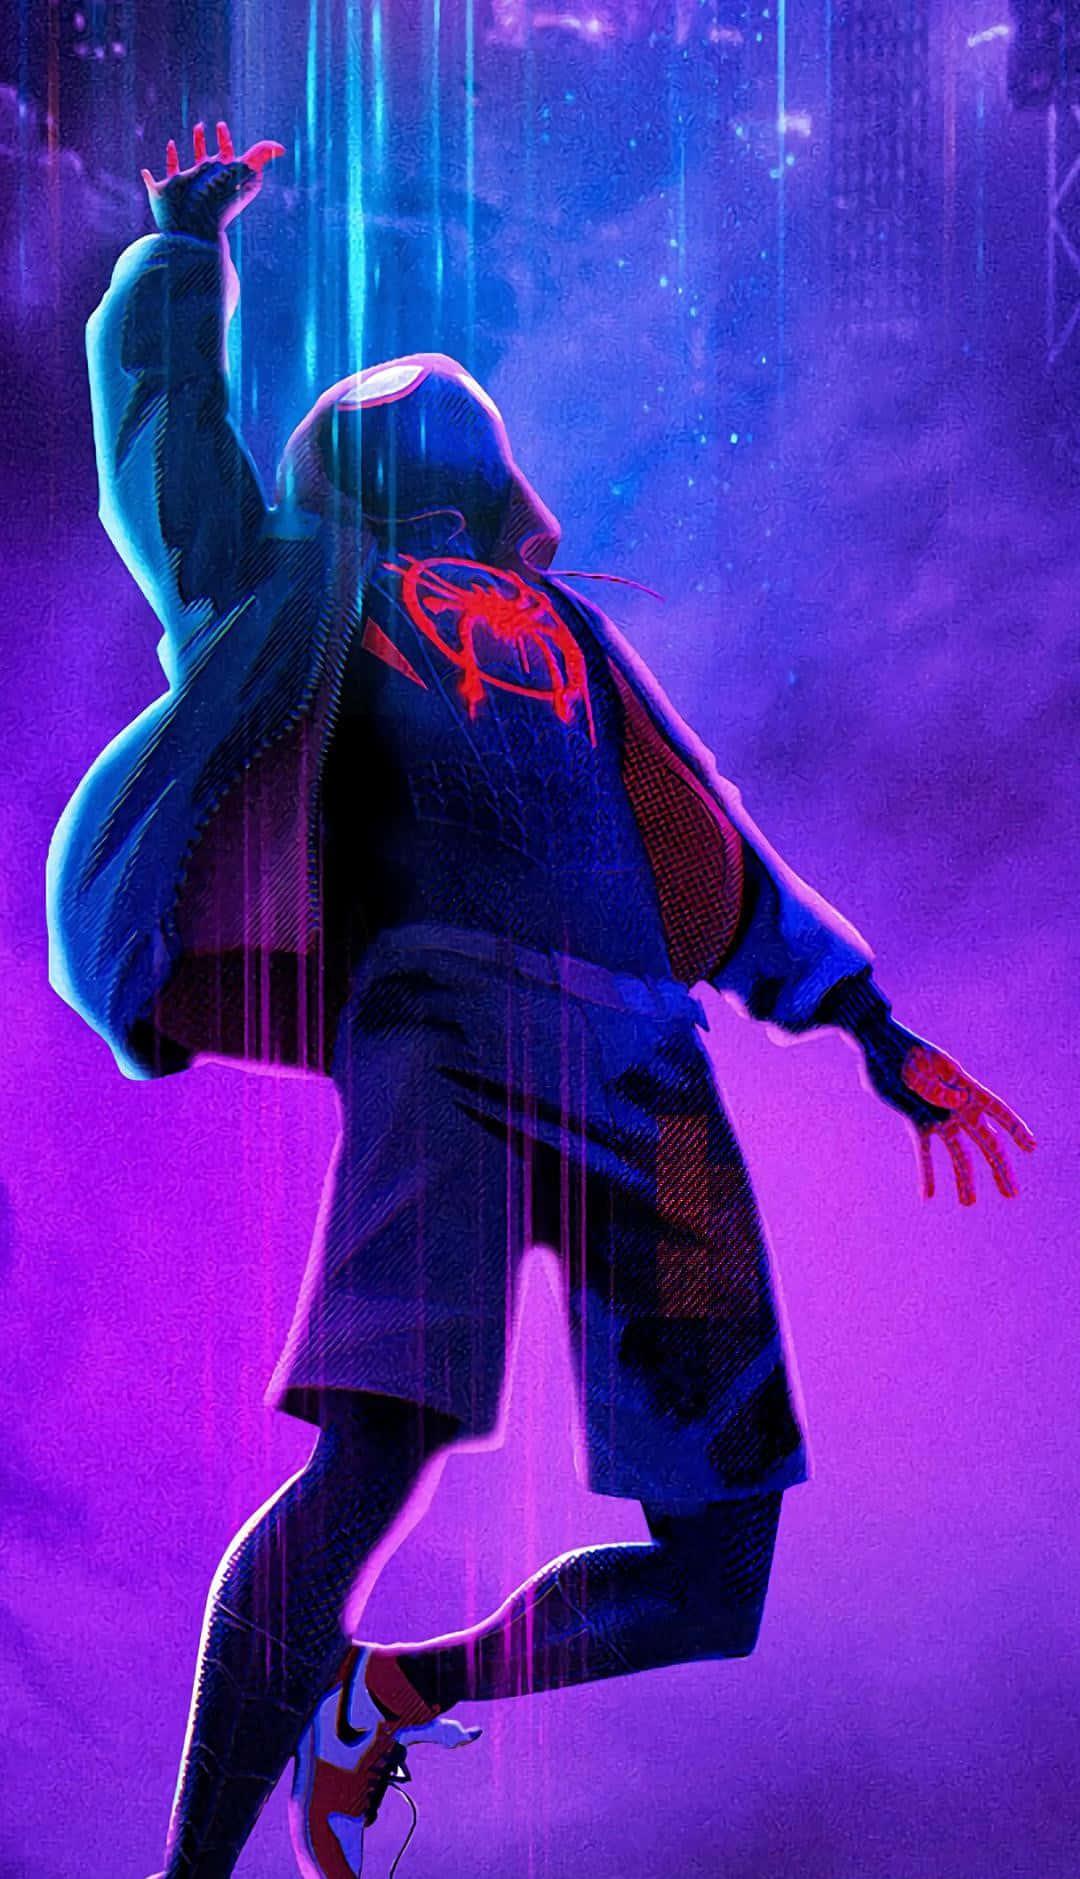 Download Neon Lights With Falling Spider Man Miles Morales iPhone Wallpaper